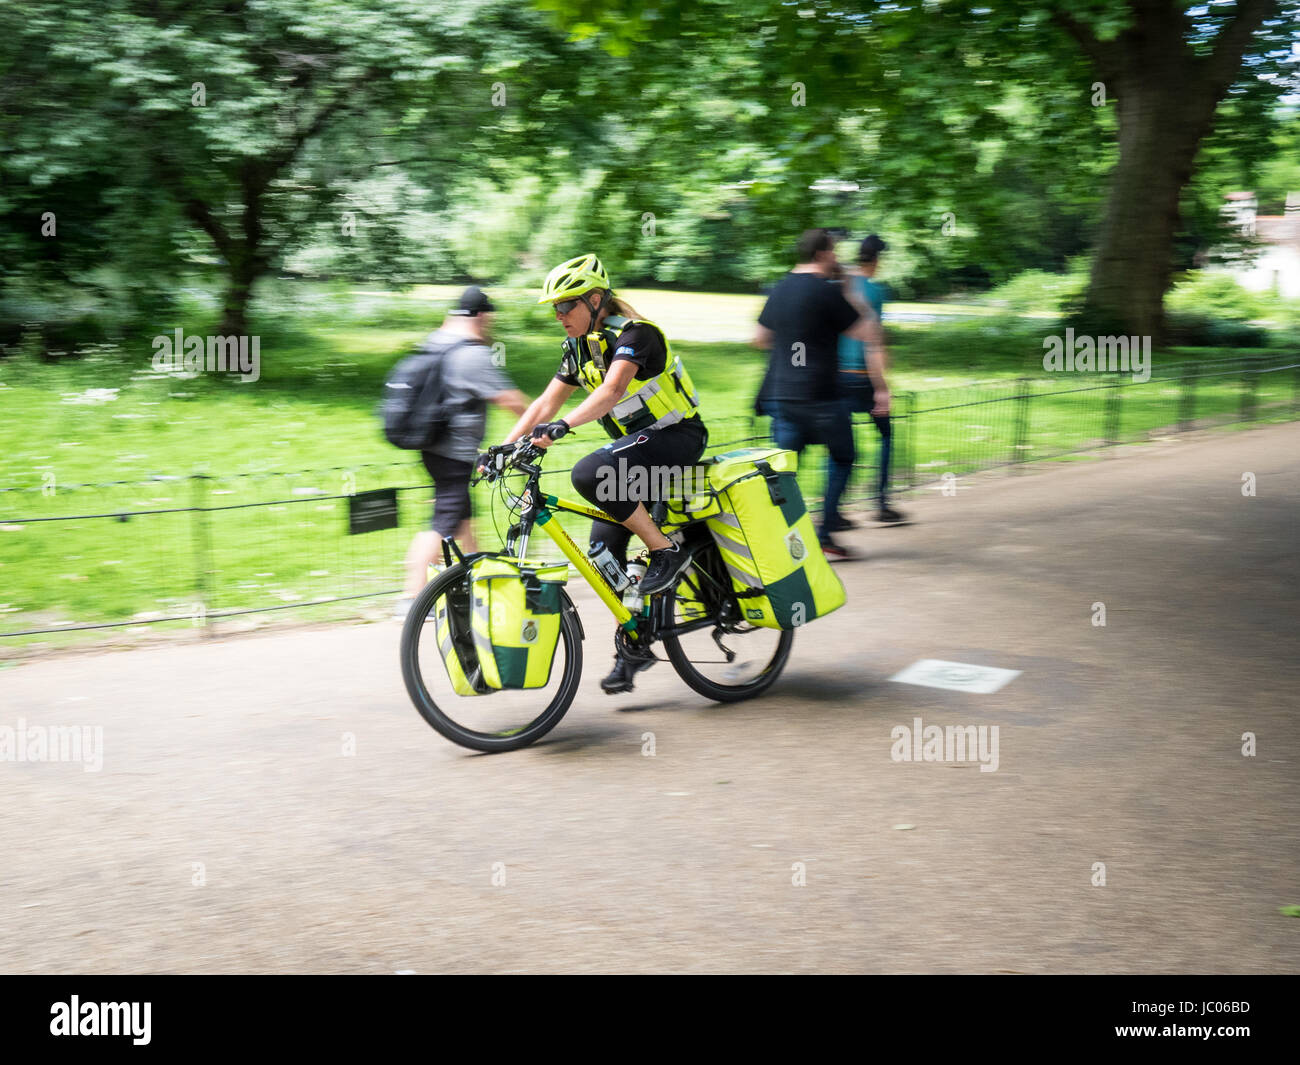 A London Ambulance Service Bike Paramedic rushes through St James Park to a call with blue lights flashing. Bike Paramedic in Motion. Stock Photo